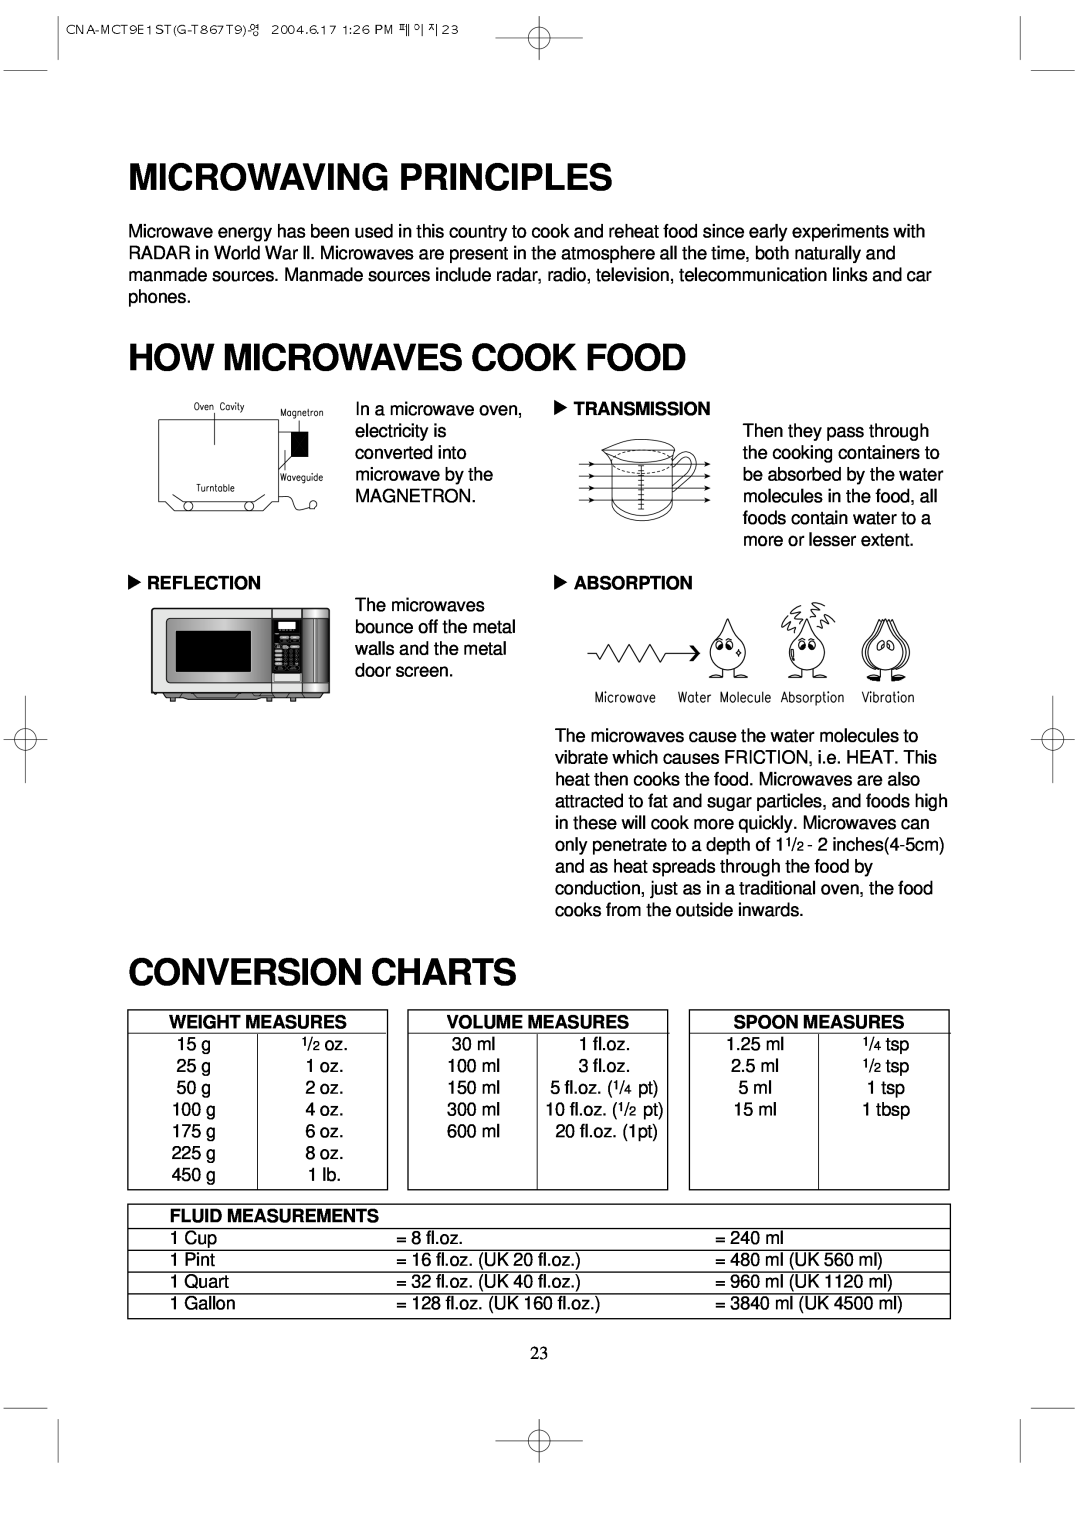 Magic Chef MCT9E1ST manual Microwaving Principles, How Microwaves Cook Food, Conversion Charts, Transmission, Reflection 